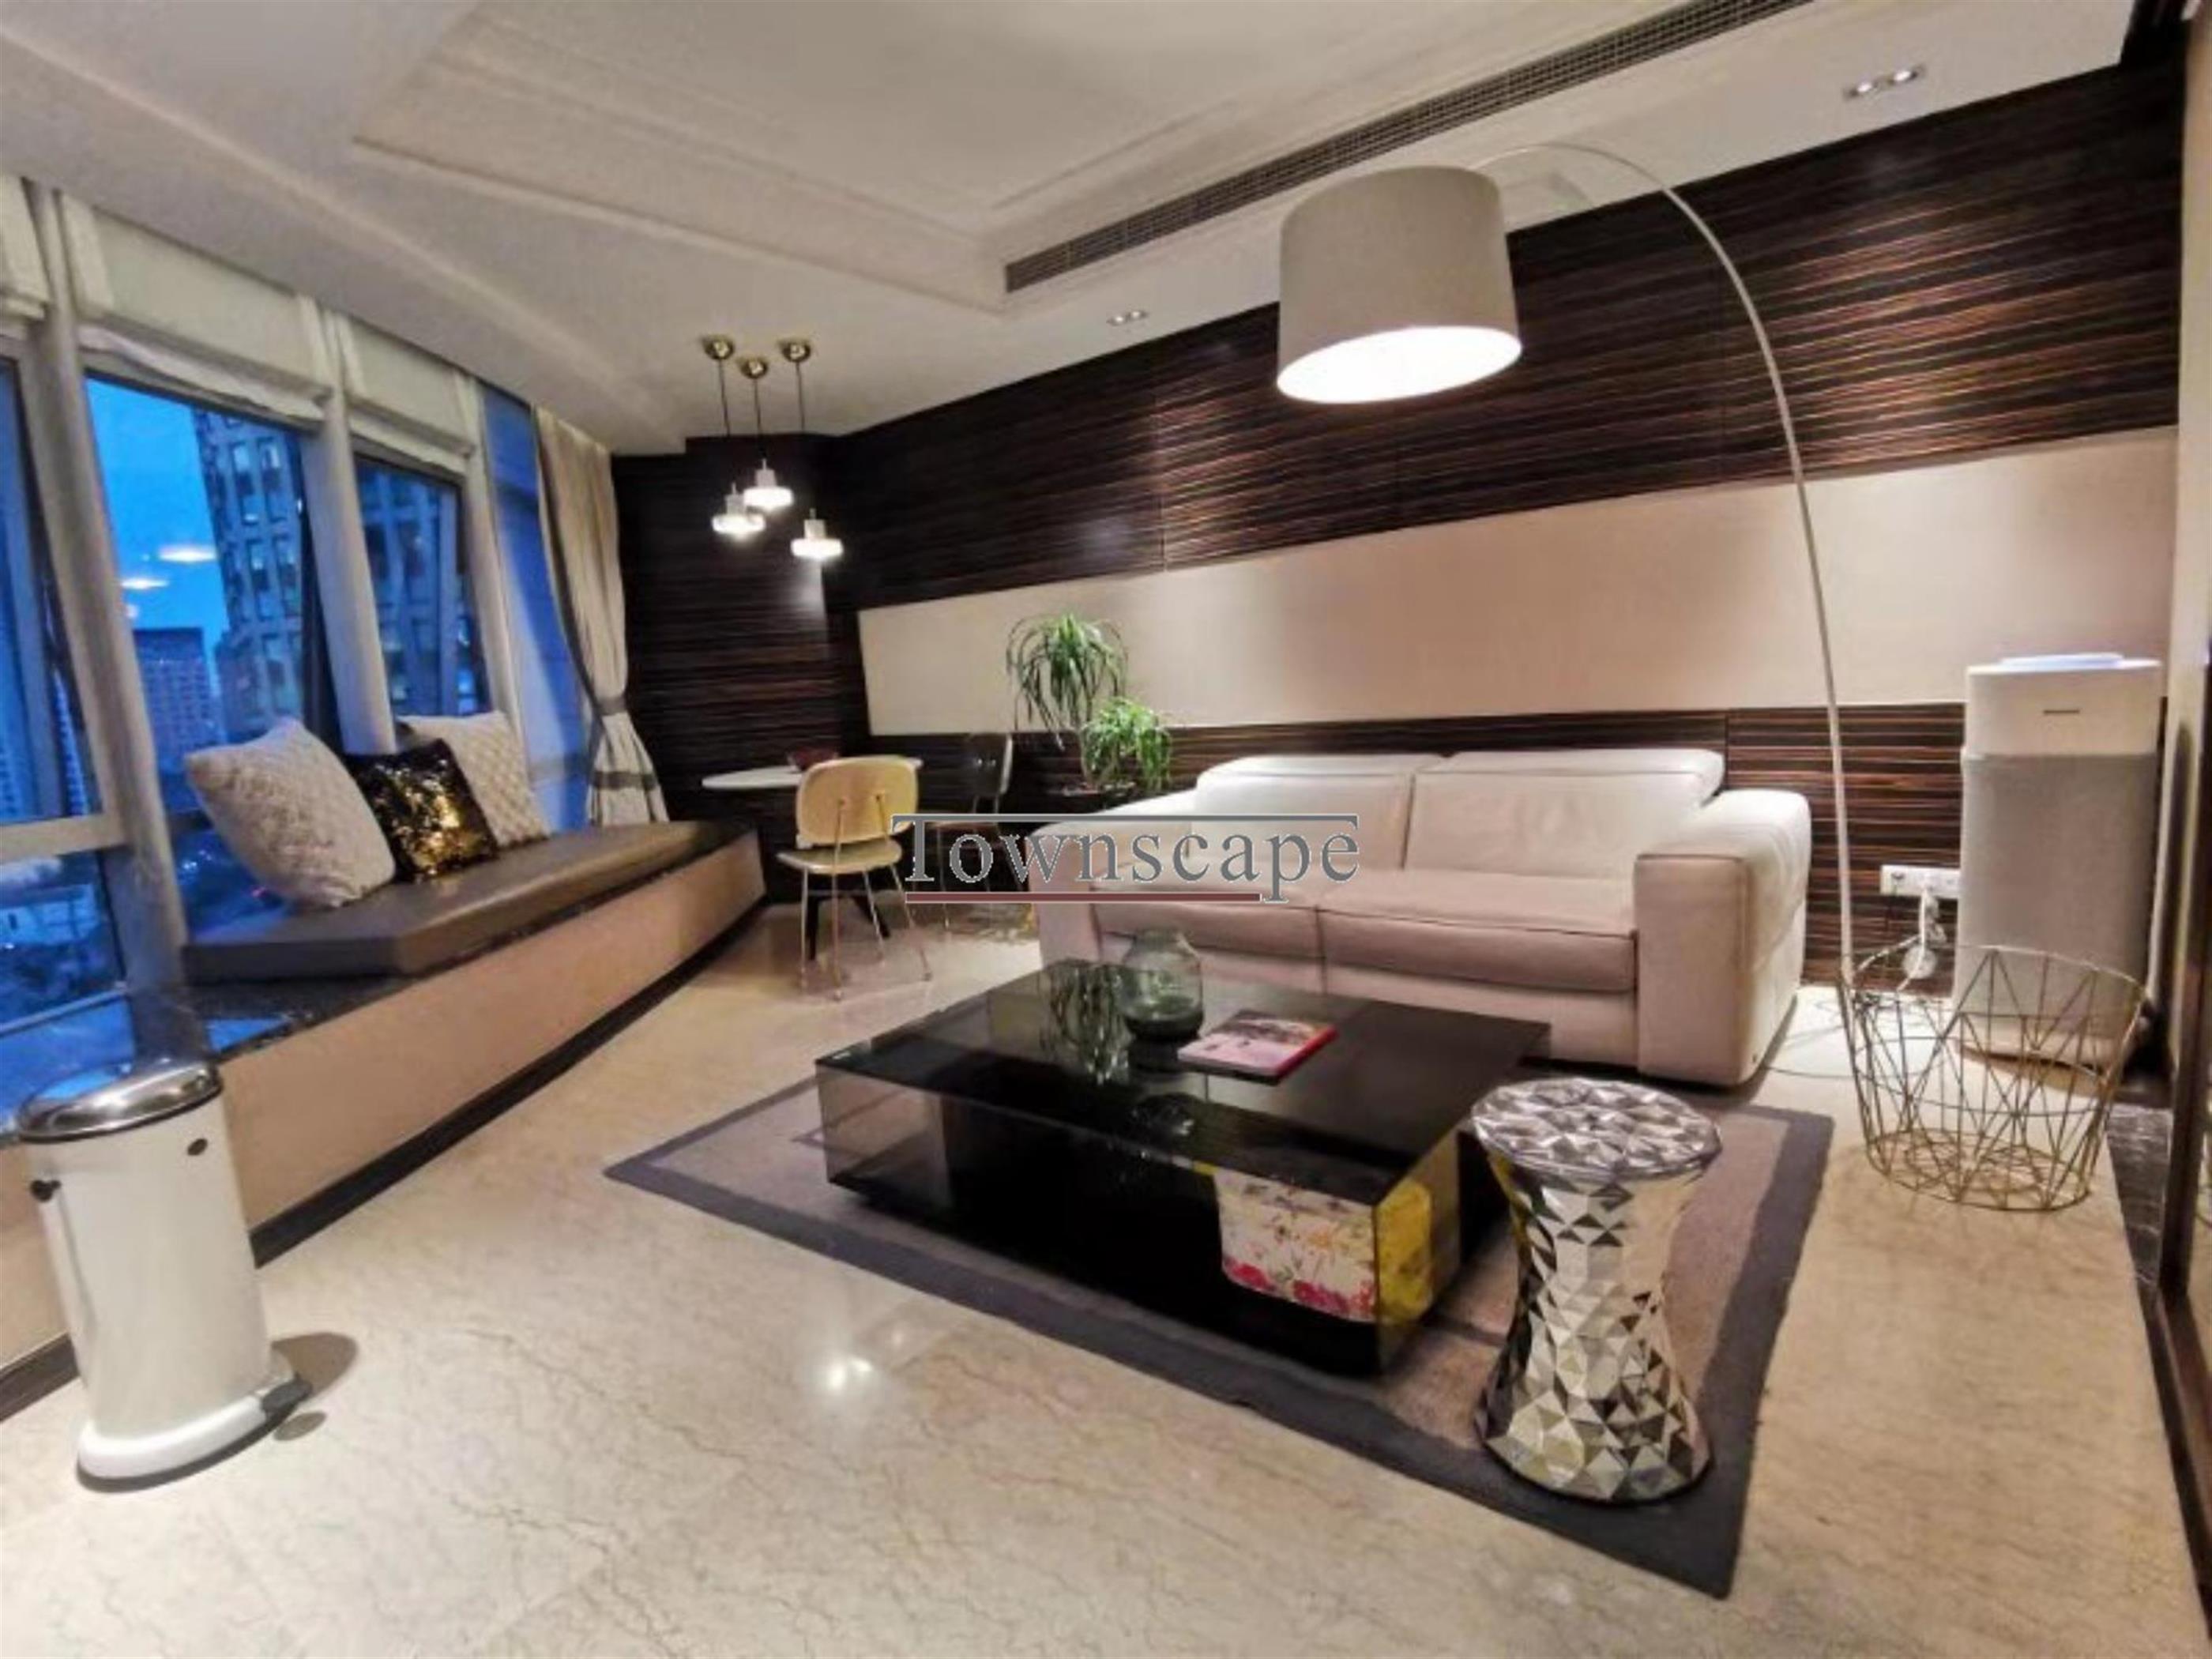 Spectacular Chic Modern Spacious 2BR West Nanjing Rd Apt for 